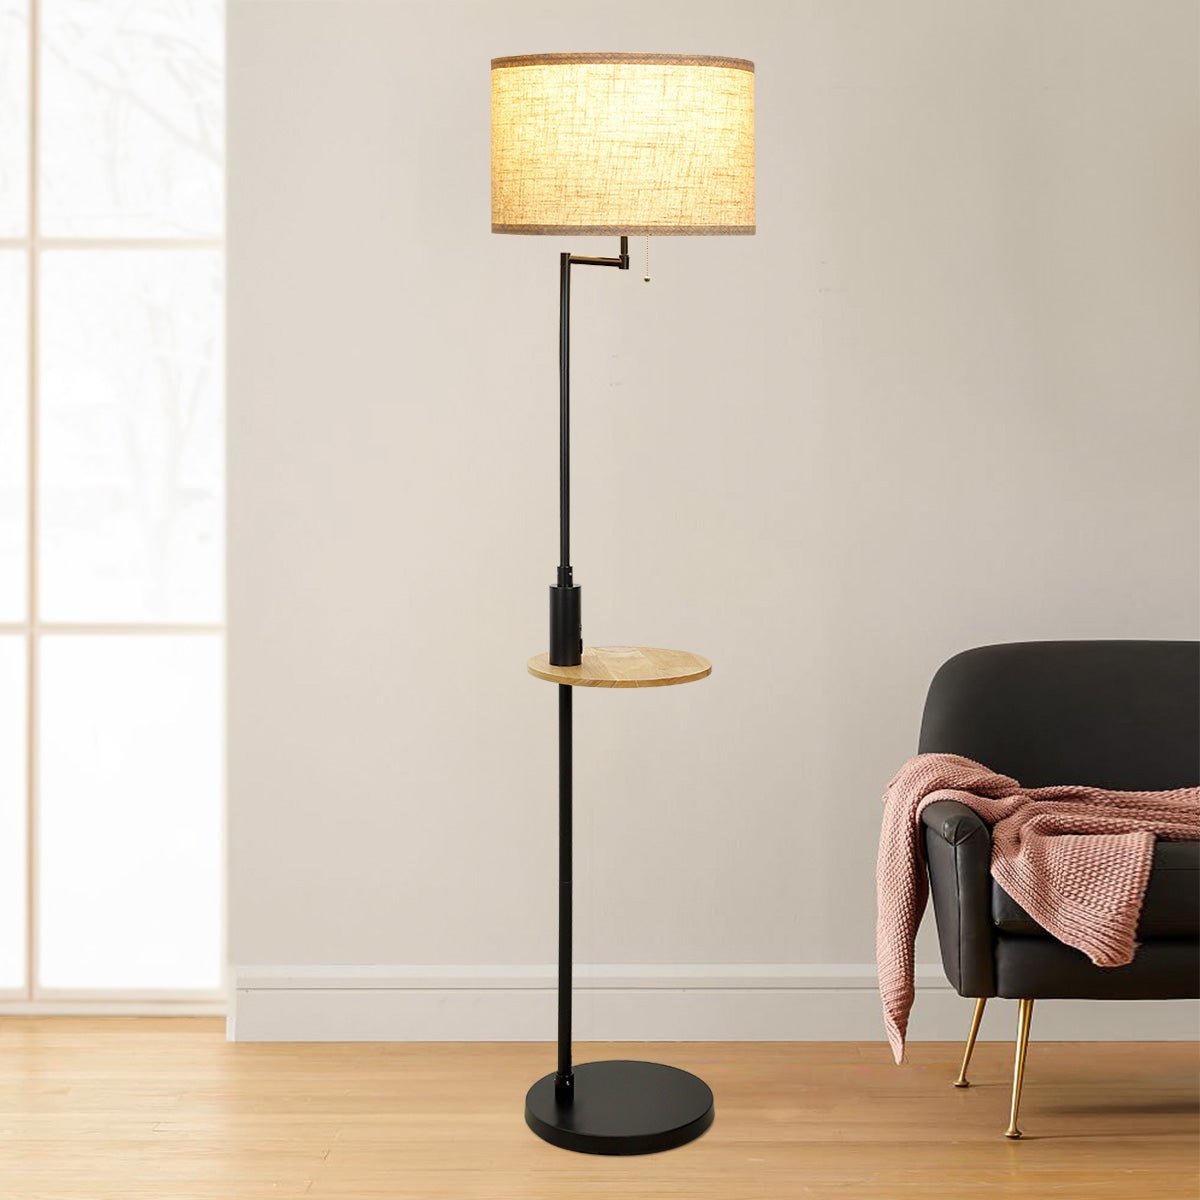 DLLT Living Room LED Floor Lamp- Standing Accent Light with USB Charging Port, Energy Saving, Tall Pole Lighting with Beside Table, Mid Century Contemporary Rooms Lamps, Warm Lights,Fabric Shade - PY-F1033B 1 | Depuley